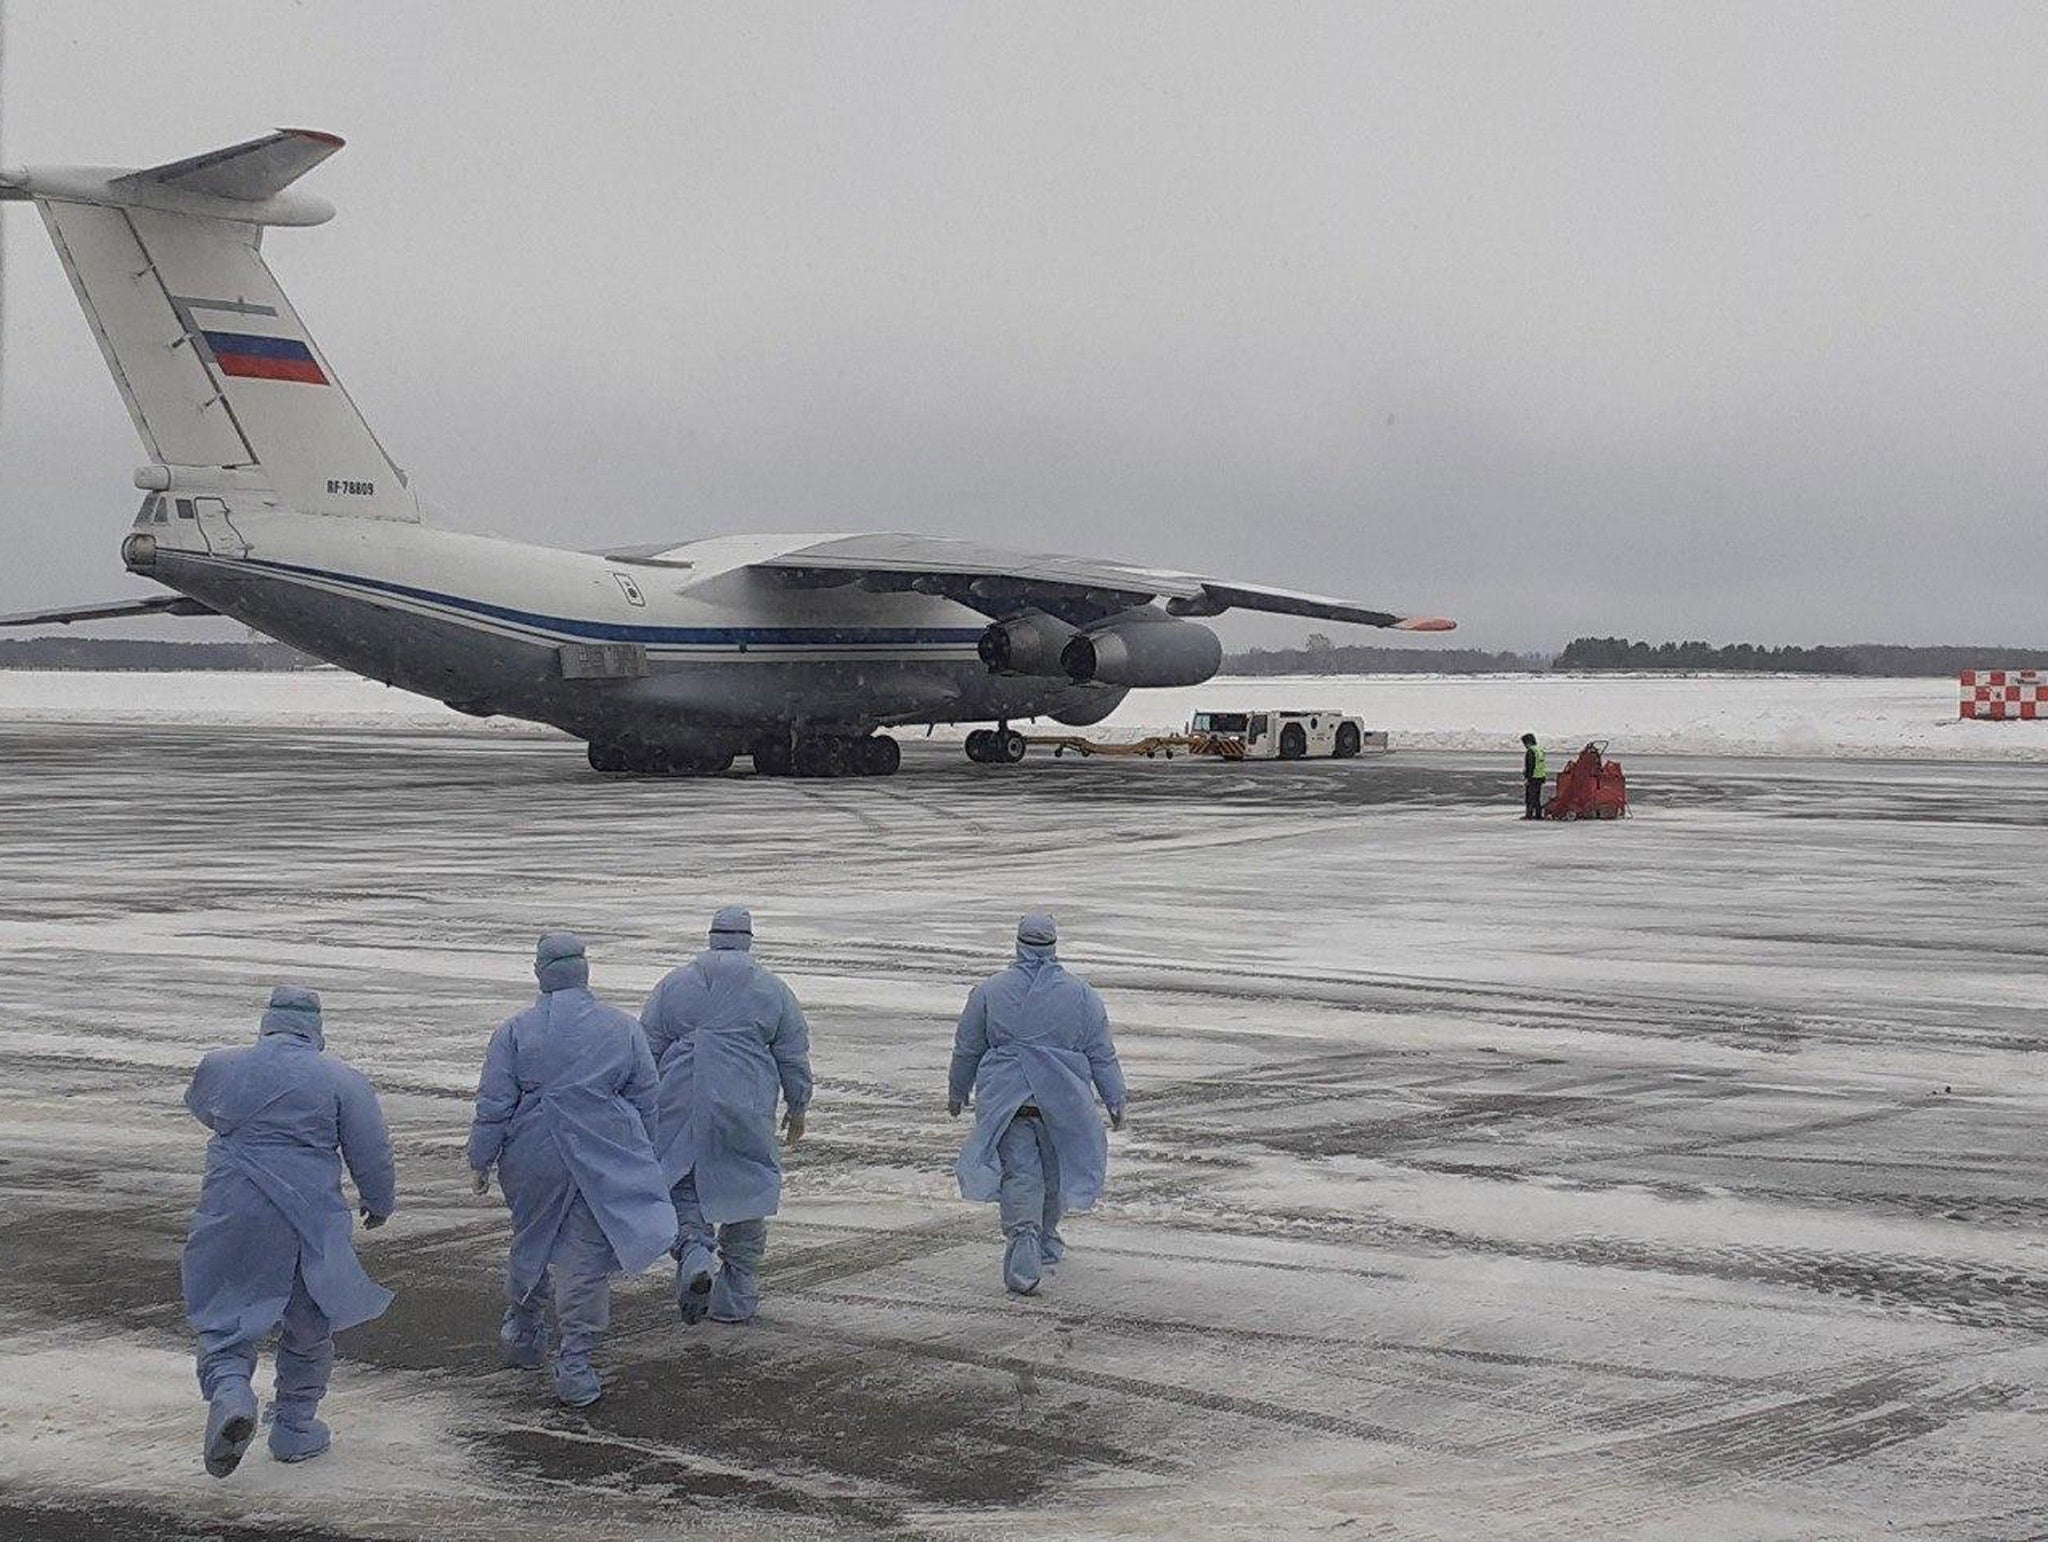 Military in protection gear approach the Ilyushin 76 jet on arrival in Tyumen airport